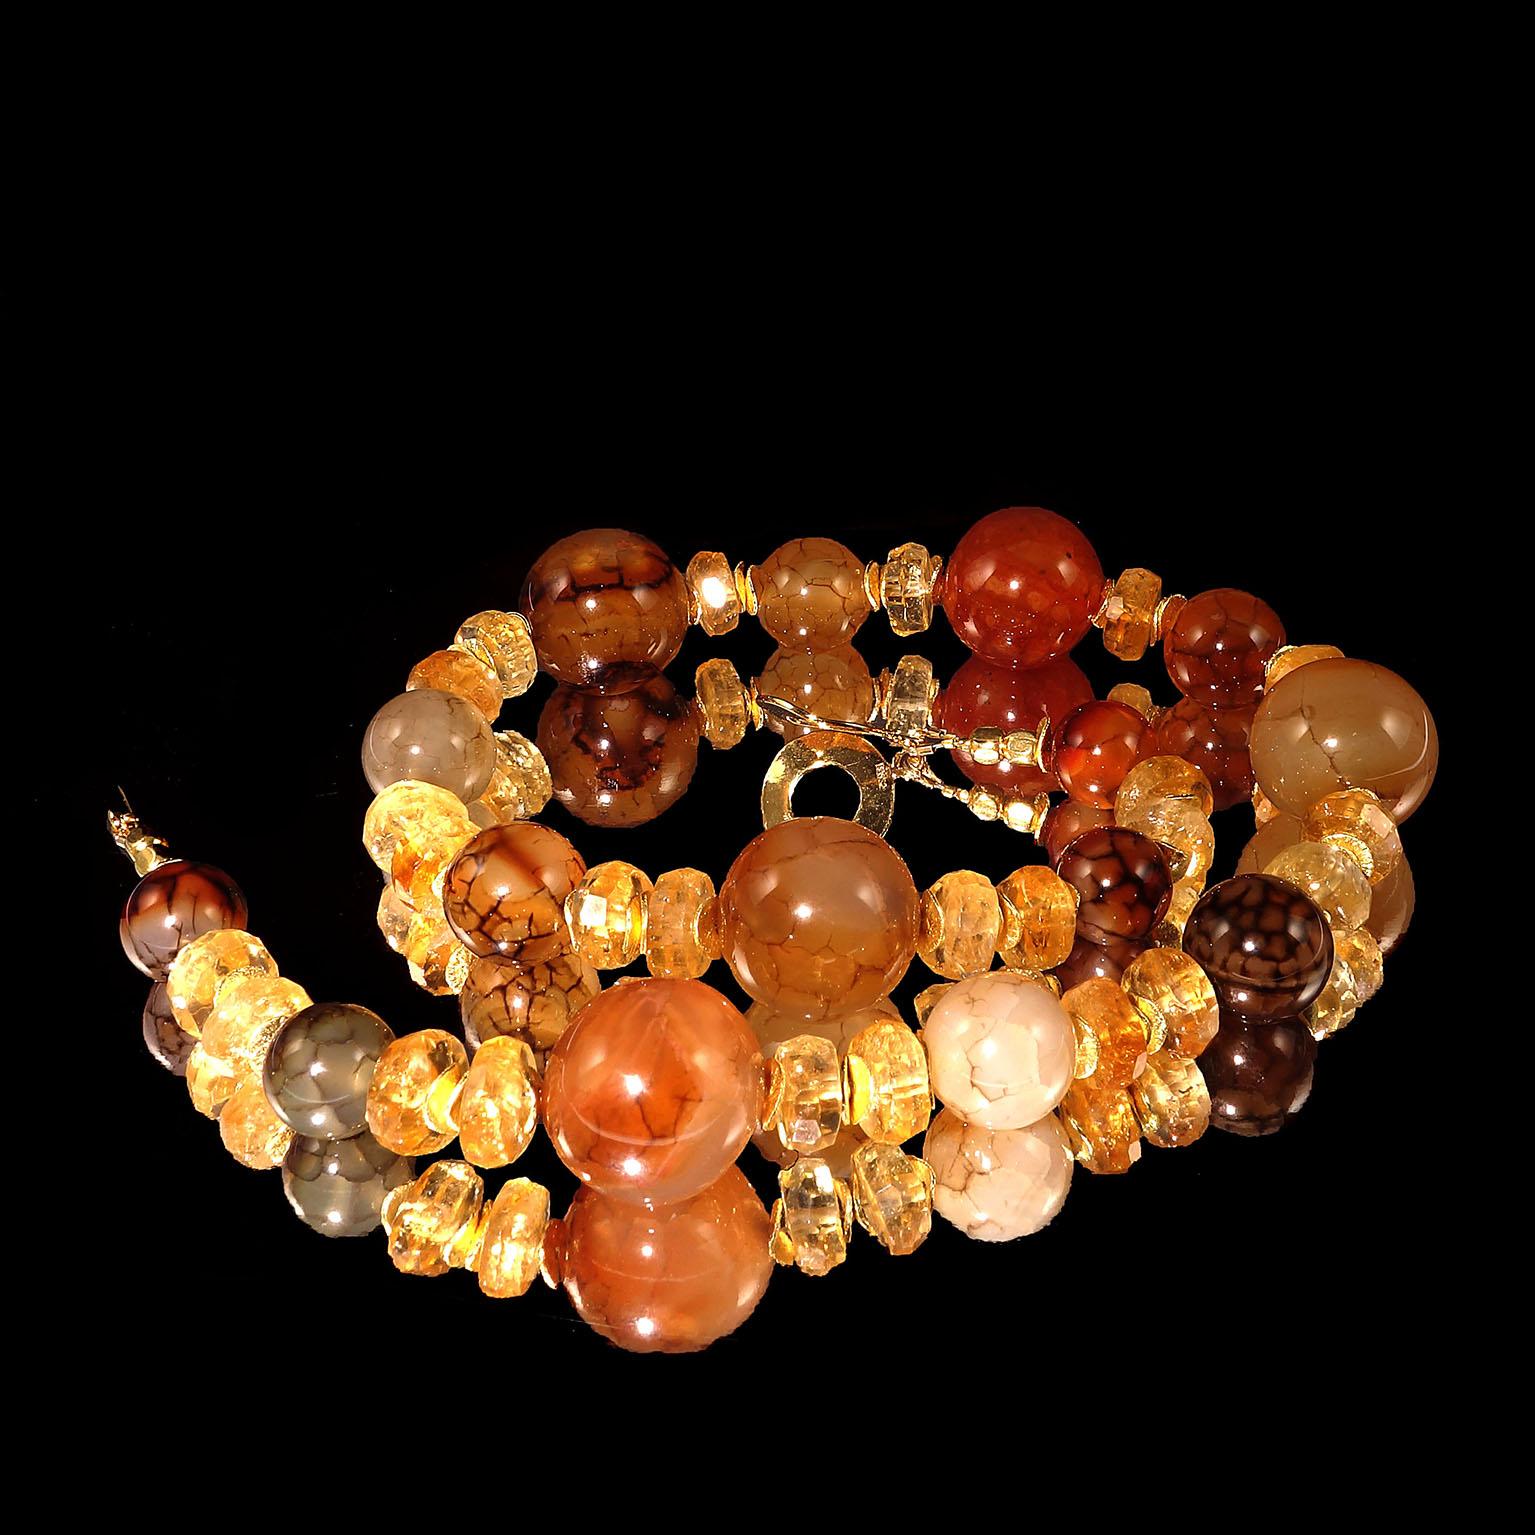 Custom made, golden brown sparkling necklace of Spiderweb Jasper and Citrine.  These gorgeous gemstones are accented with goldtone flutters and a 24K gold vermeil toggle clasp.  Each Spiderweb Jasper sphere is unique is color and webbing ranging